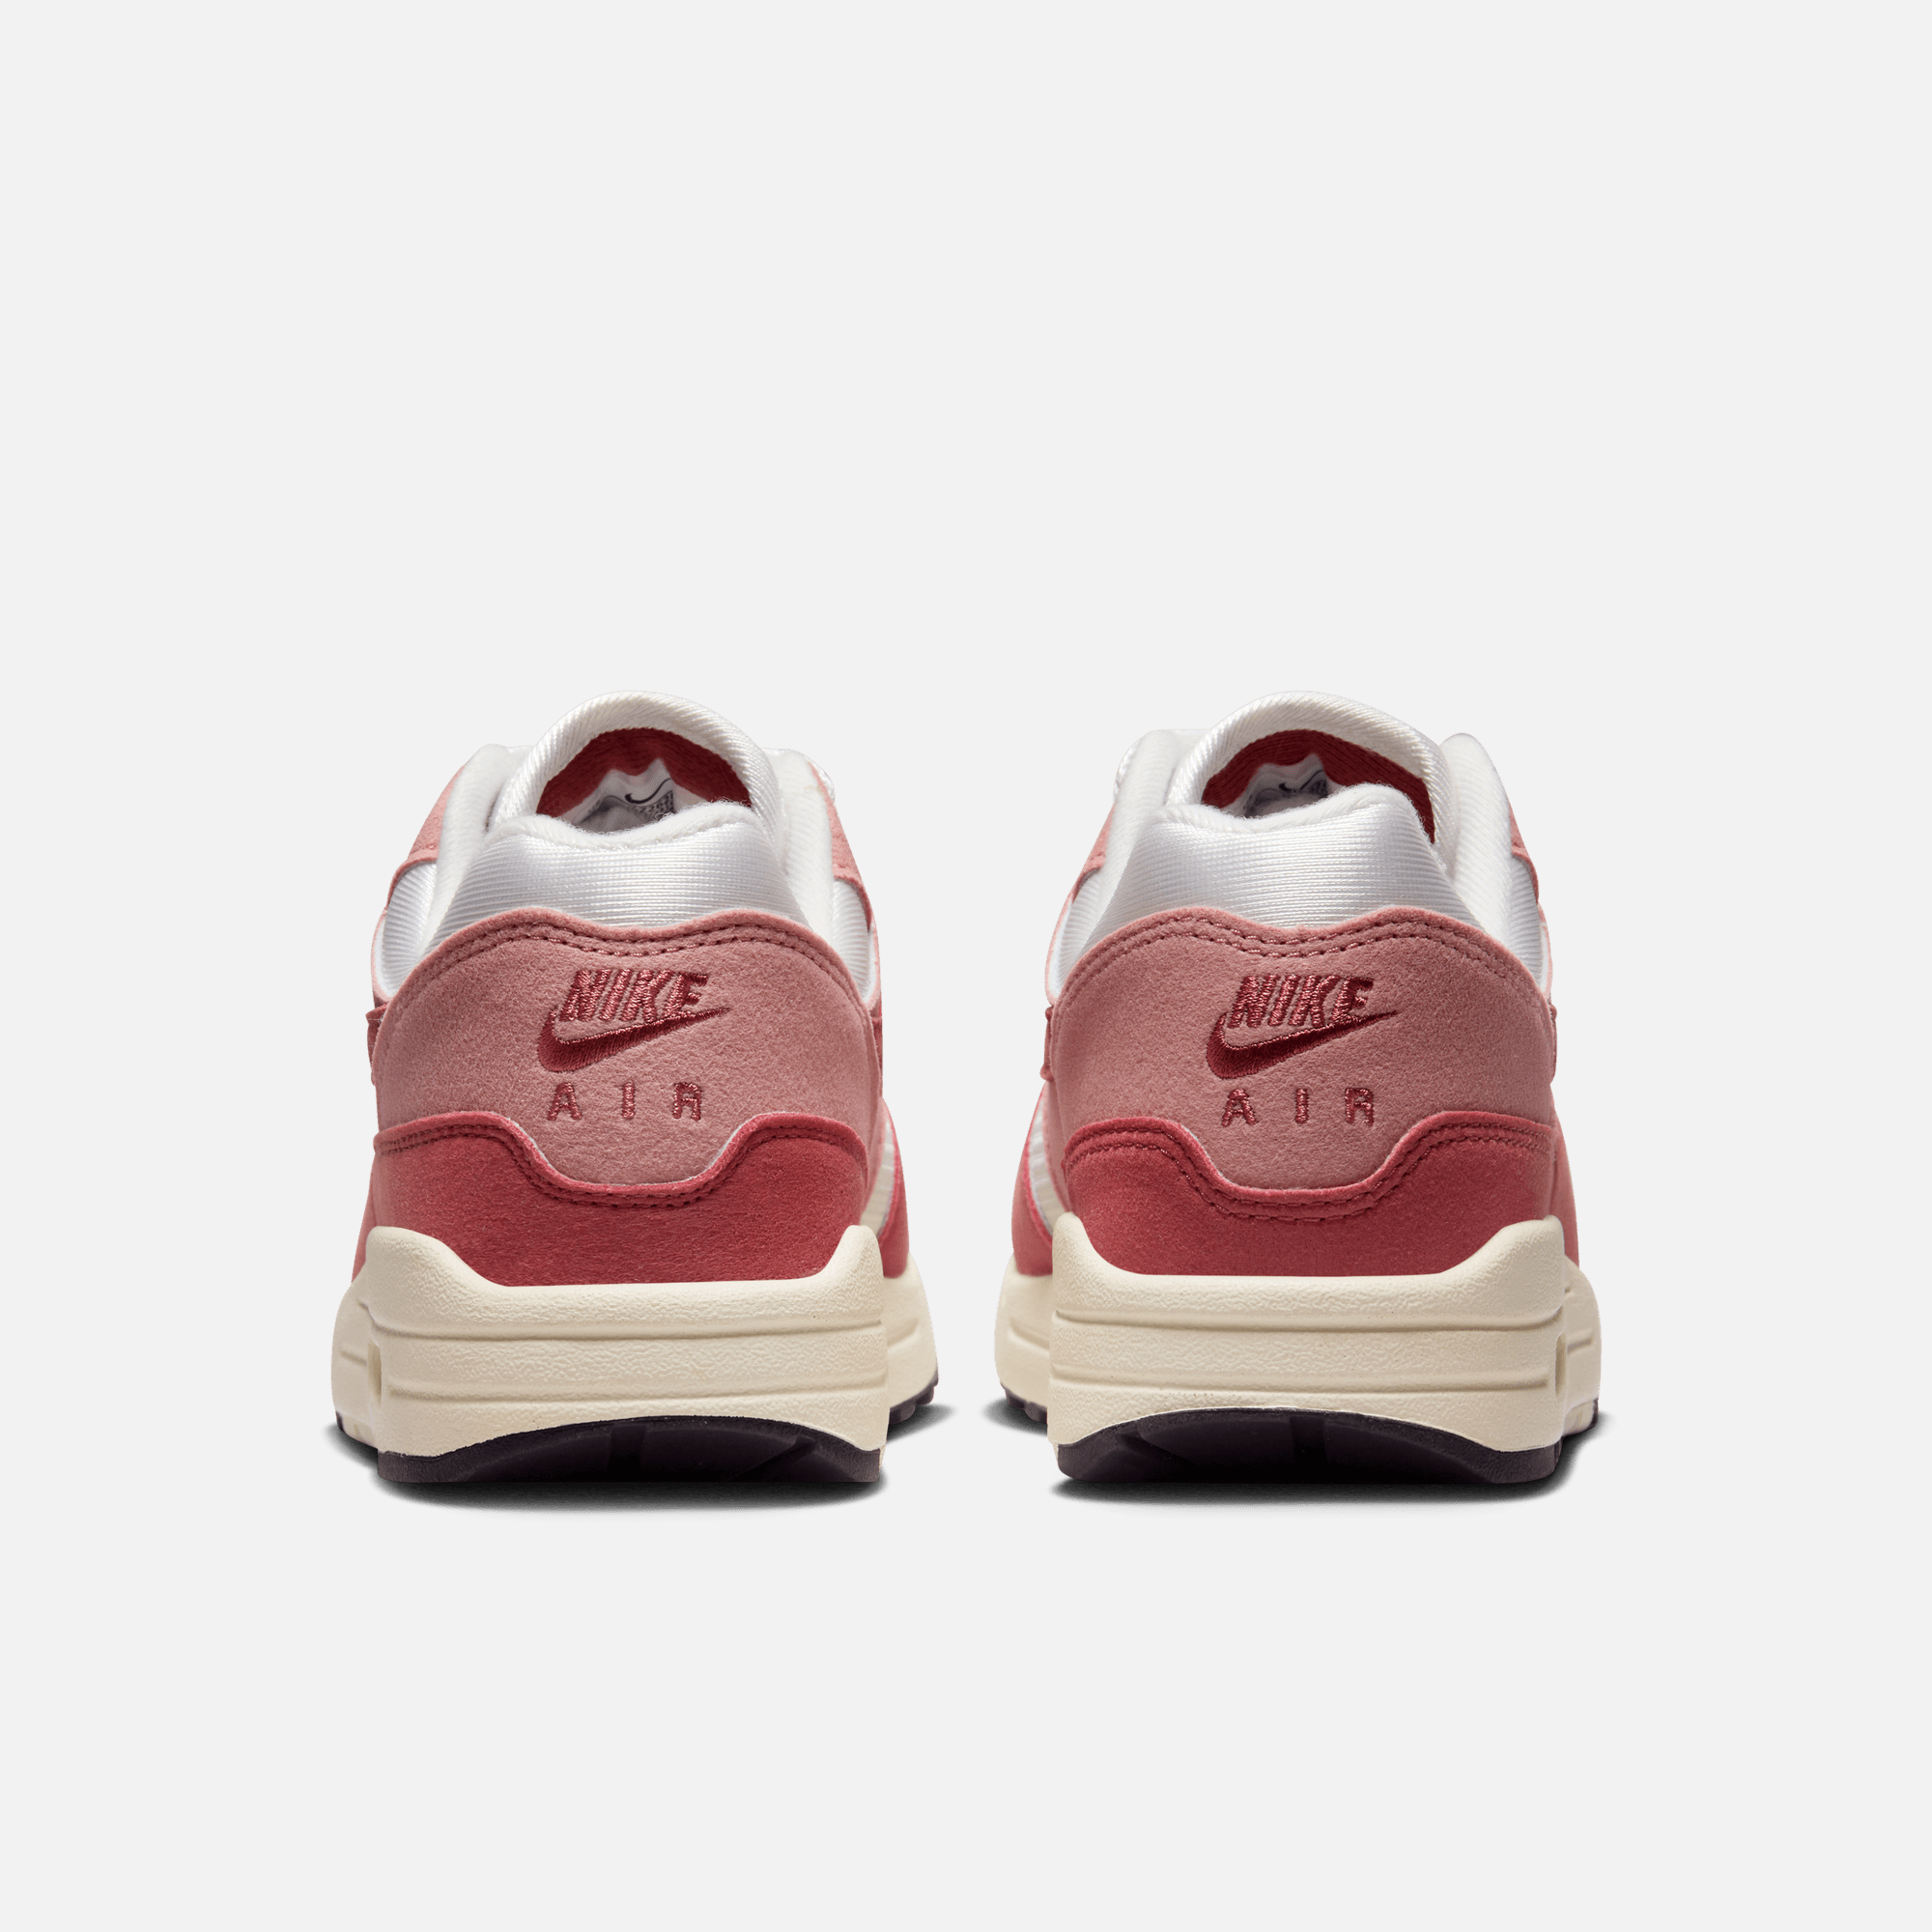 Nike Women's Air Max 1 Red Stardust – Puffer Reds